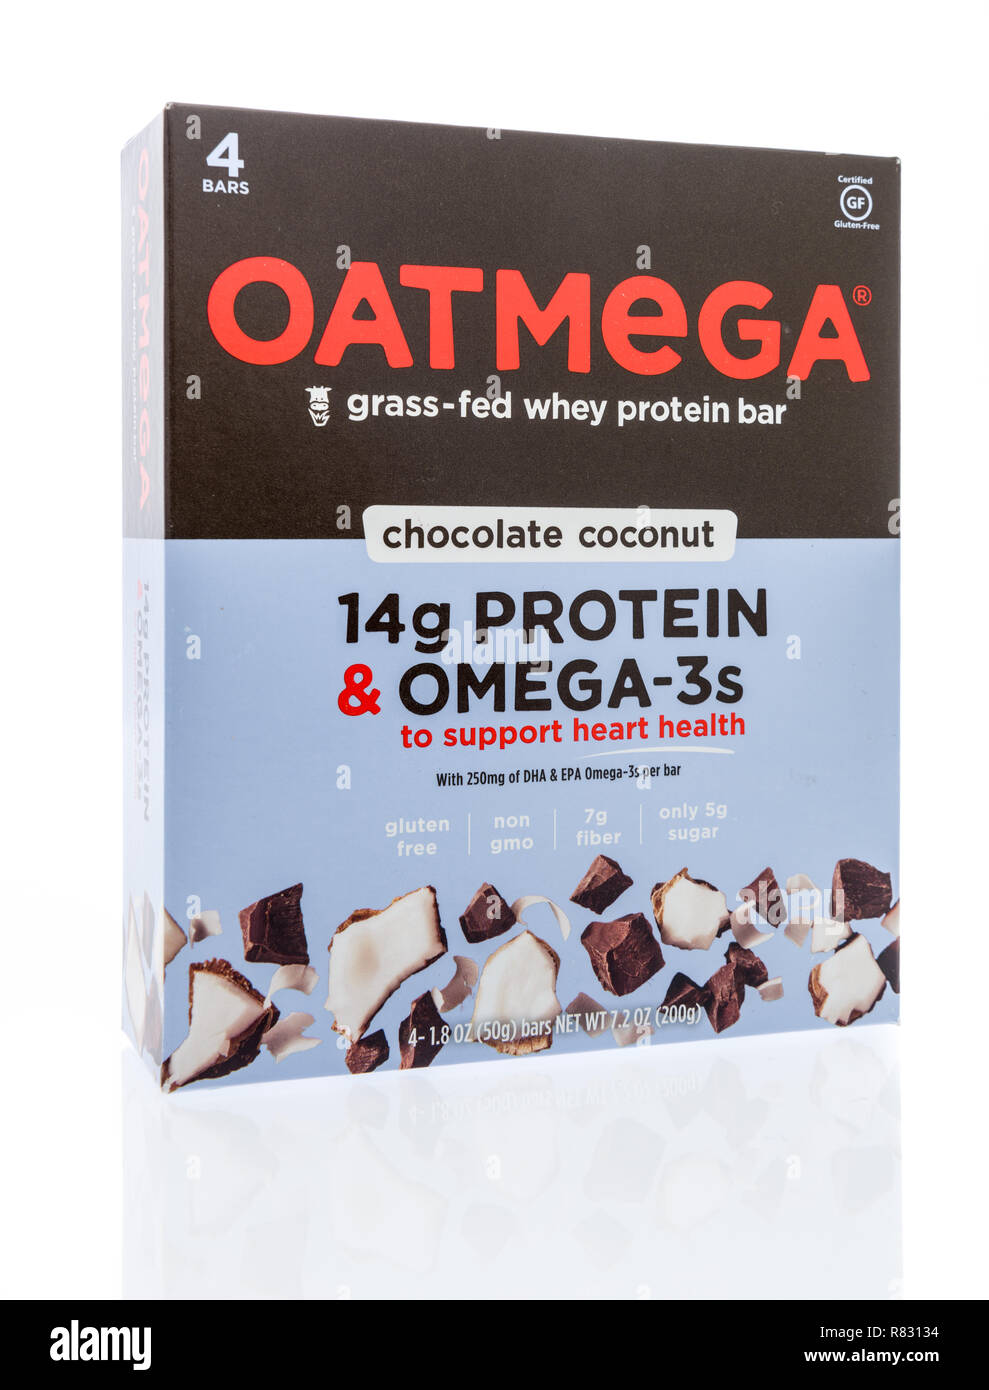 Winneconne, WI - 10 December 2018: A package of Oatmega grass-fed whey protein bar on an isolated background. Stock Photo